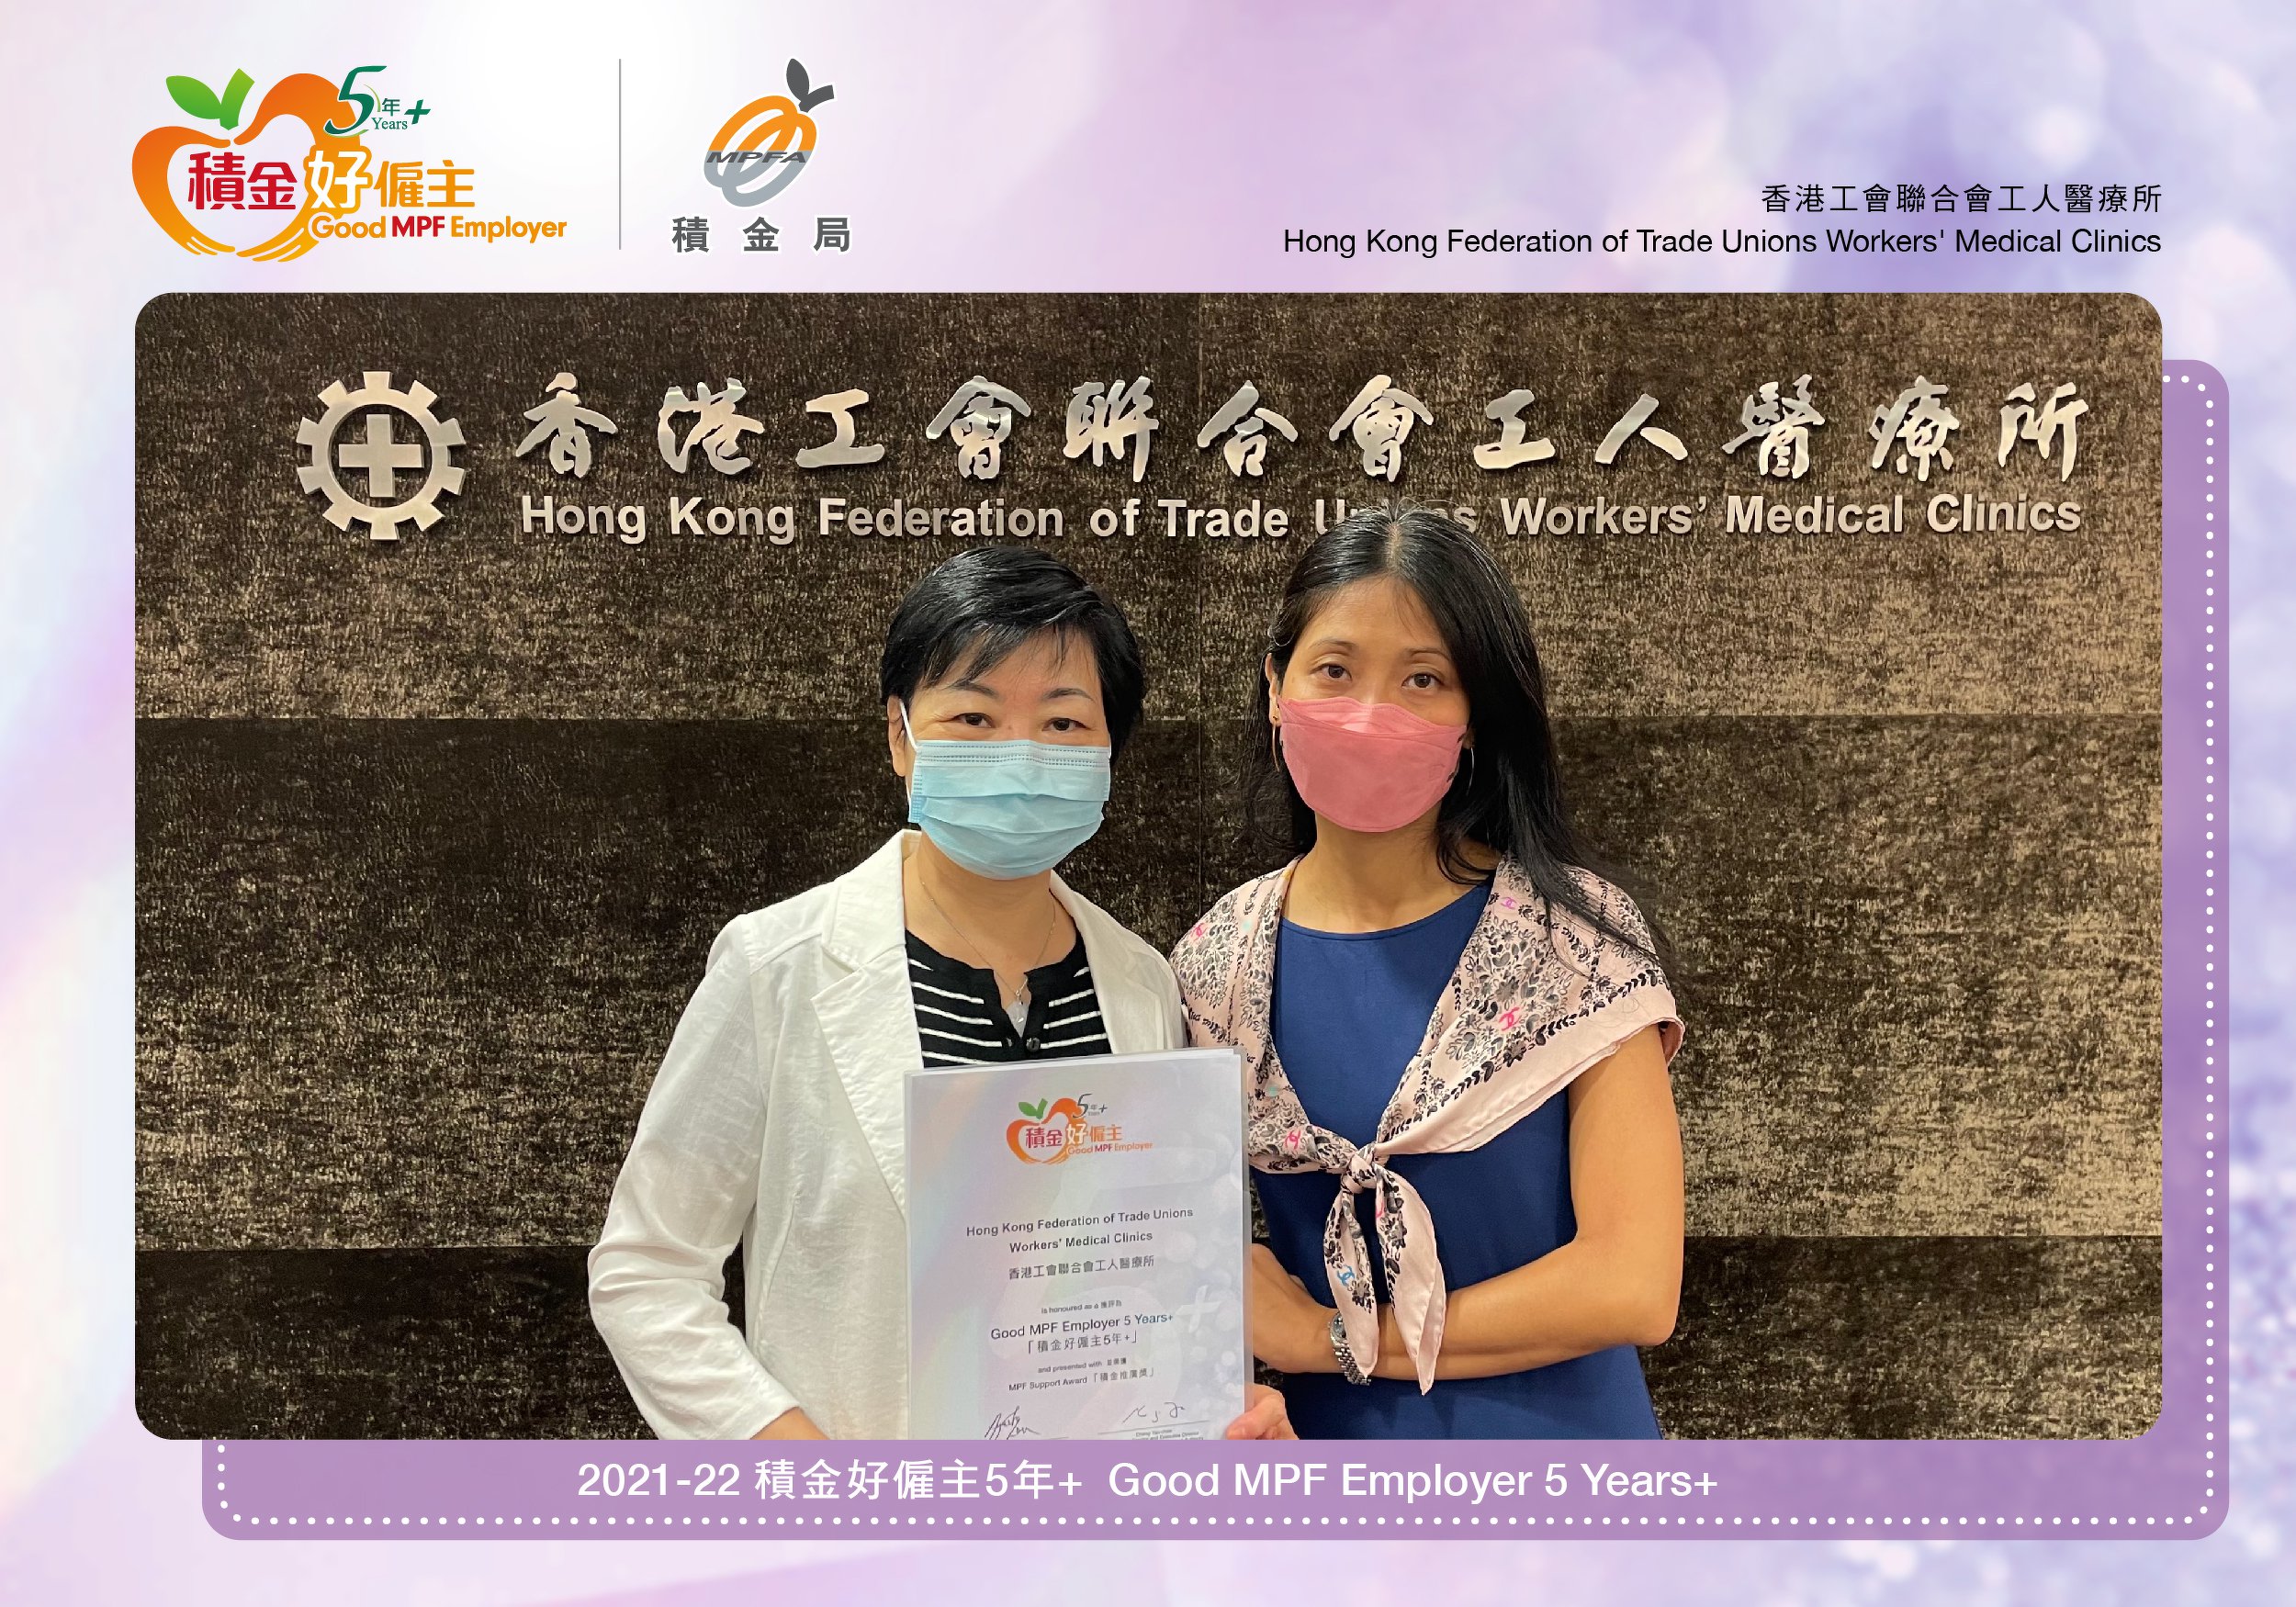 Hong Kong Federation of Trade Unions Workers' Medical Clinics 香港工會聯合會工人醫療所